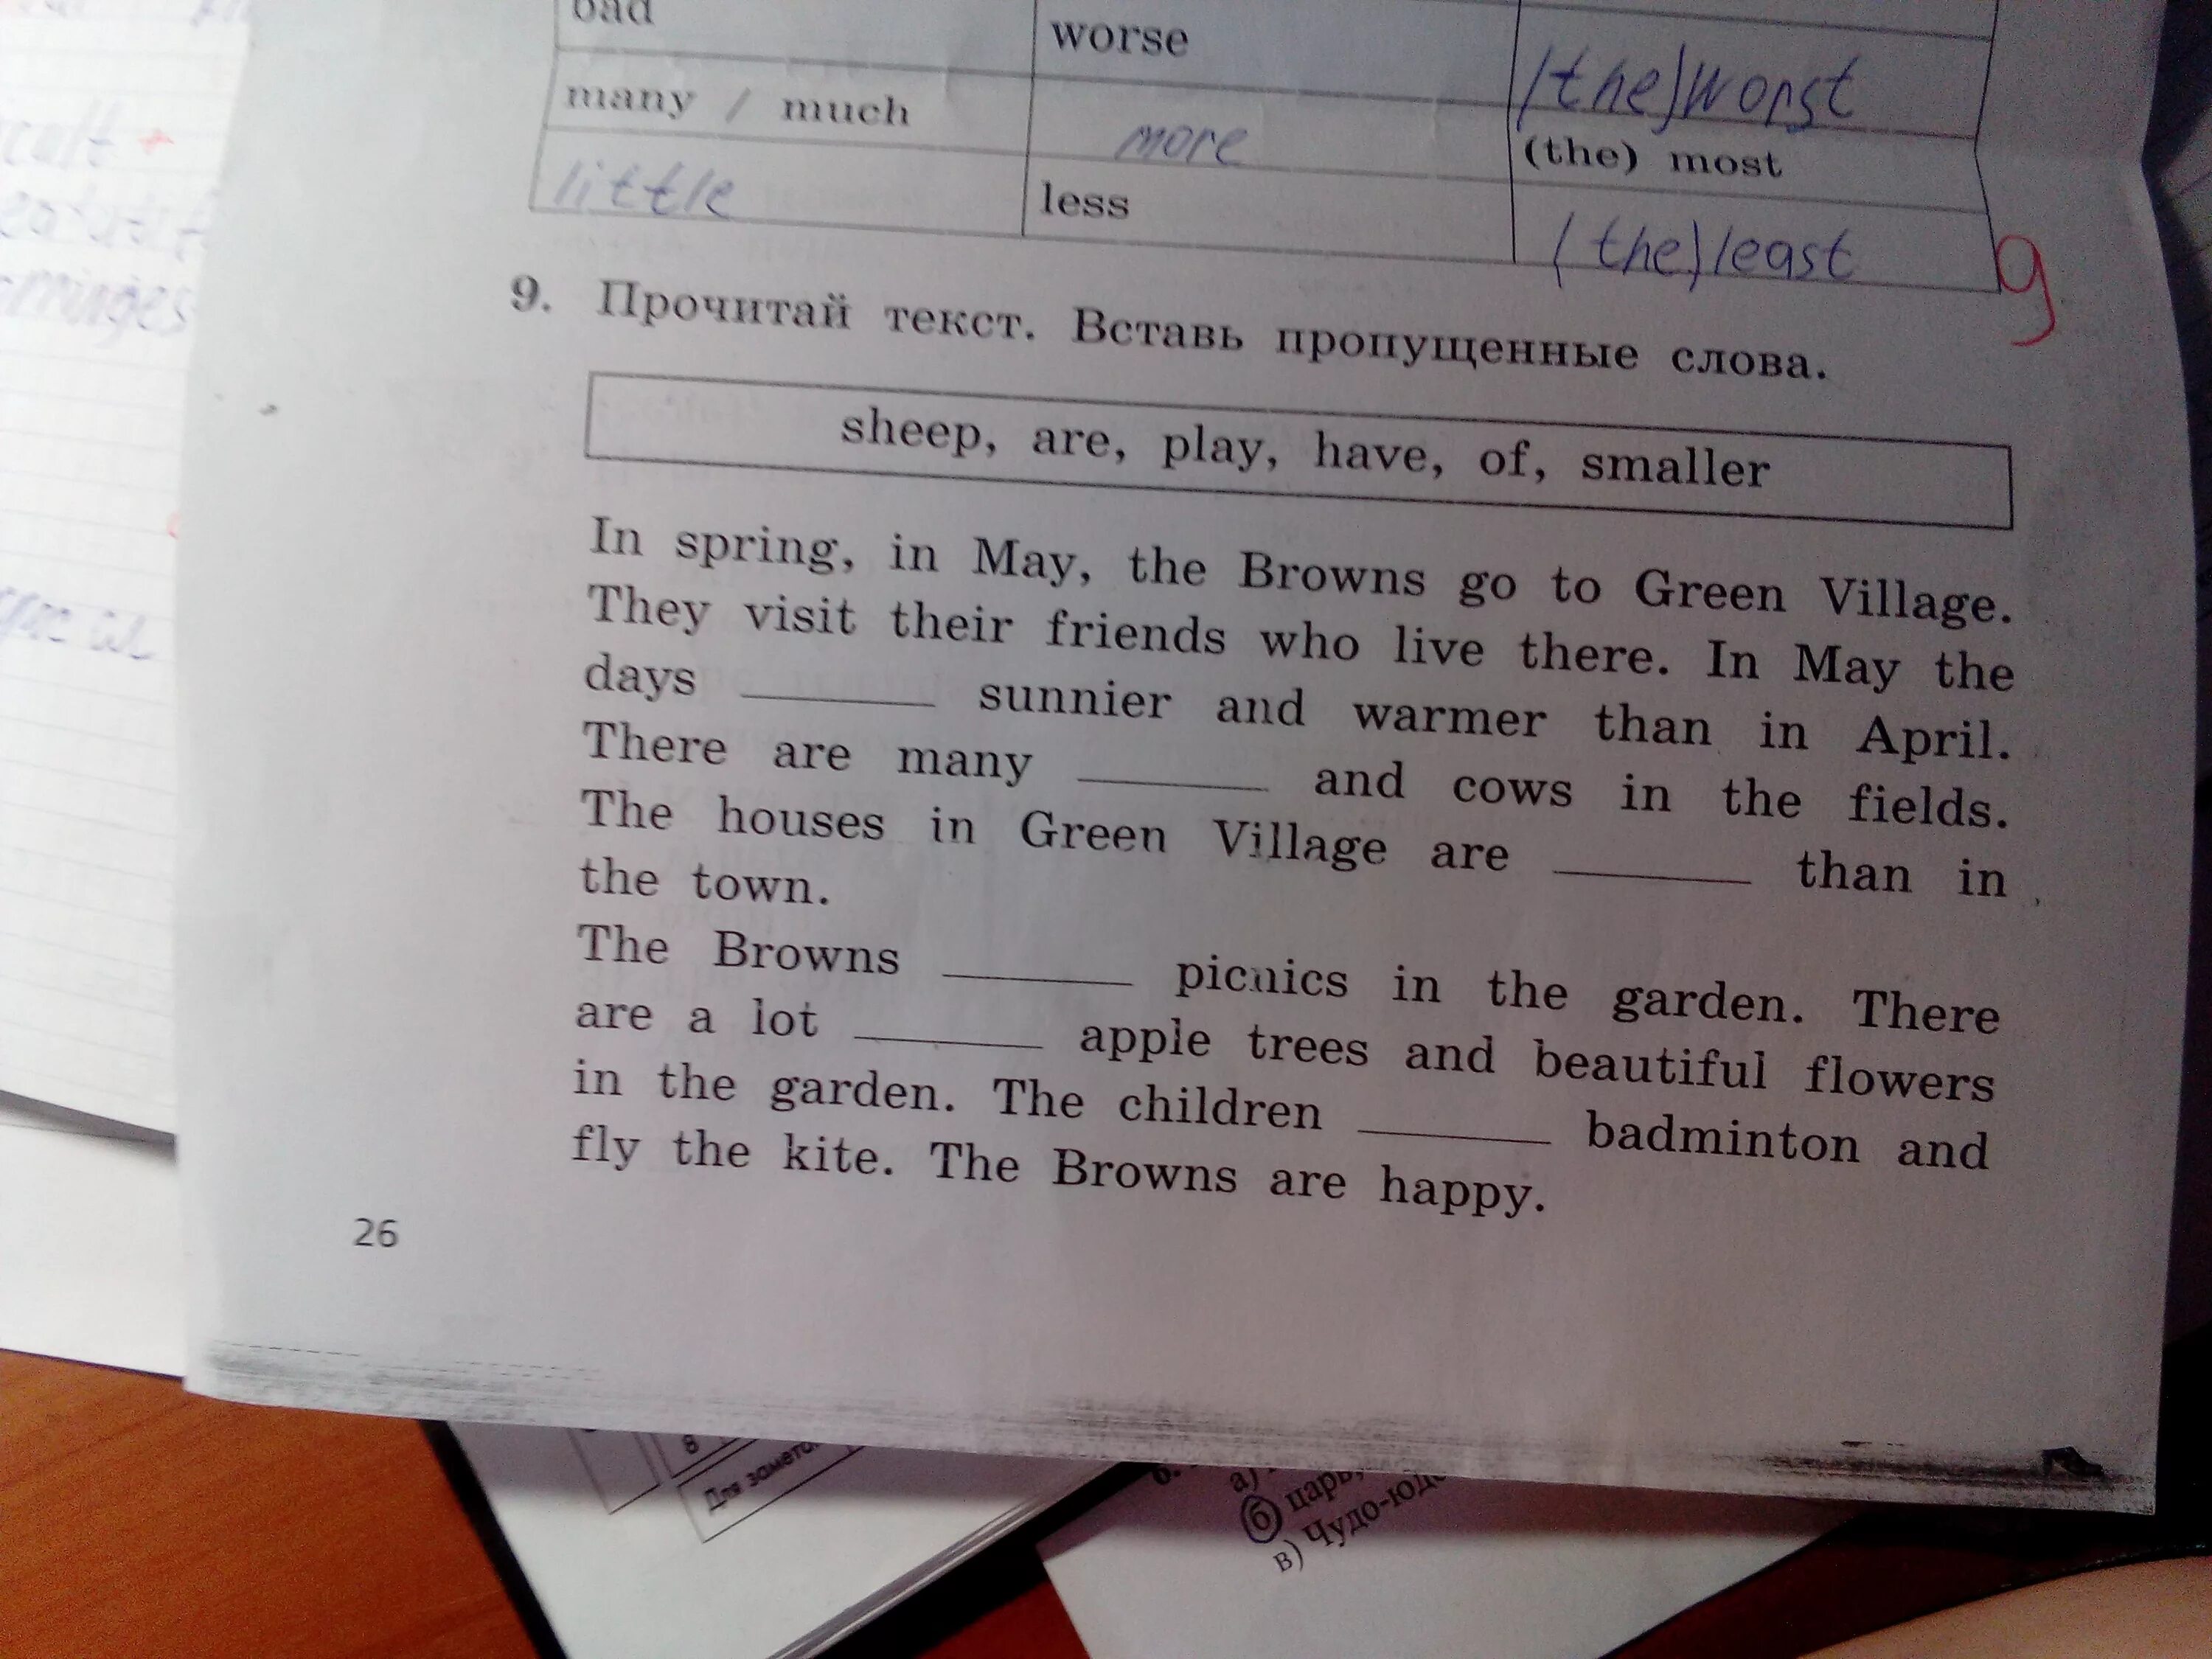 Прочитайте текст и вставьте пропущенные слова летом. In Spring in May the Browns go to Green Village вставить пропущенные слова. Прочитай текст вставь пропущенные слова. Вставьте пропущенные слова was were. Вставьте пропущенные слова is and are and was and were.